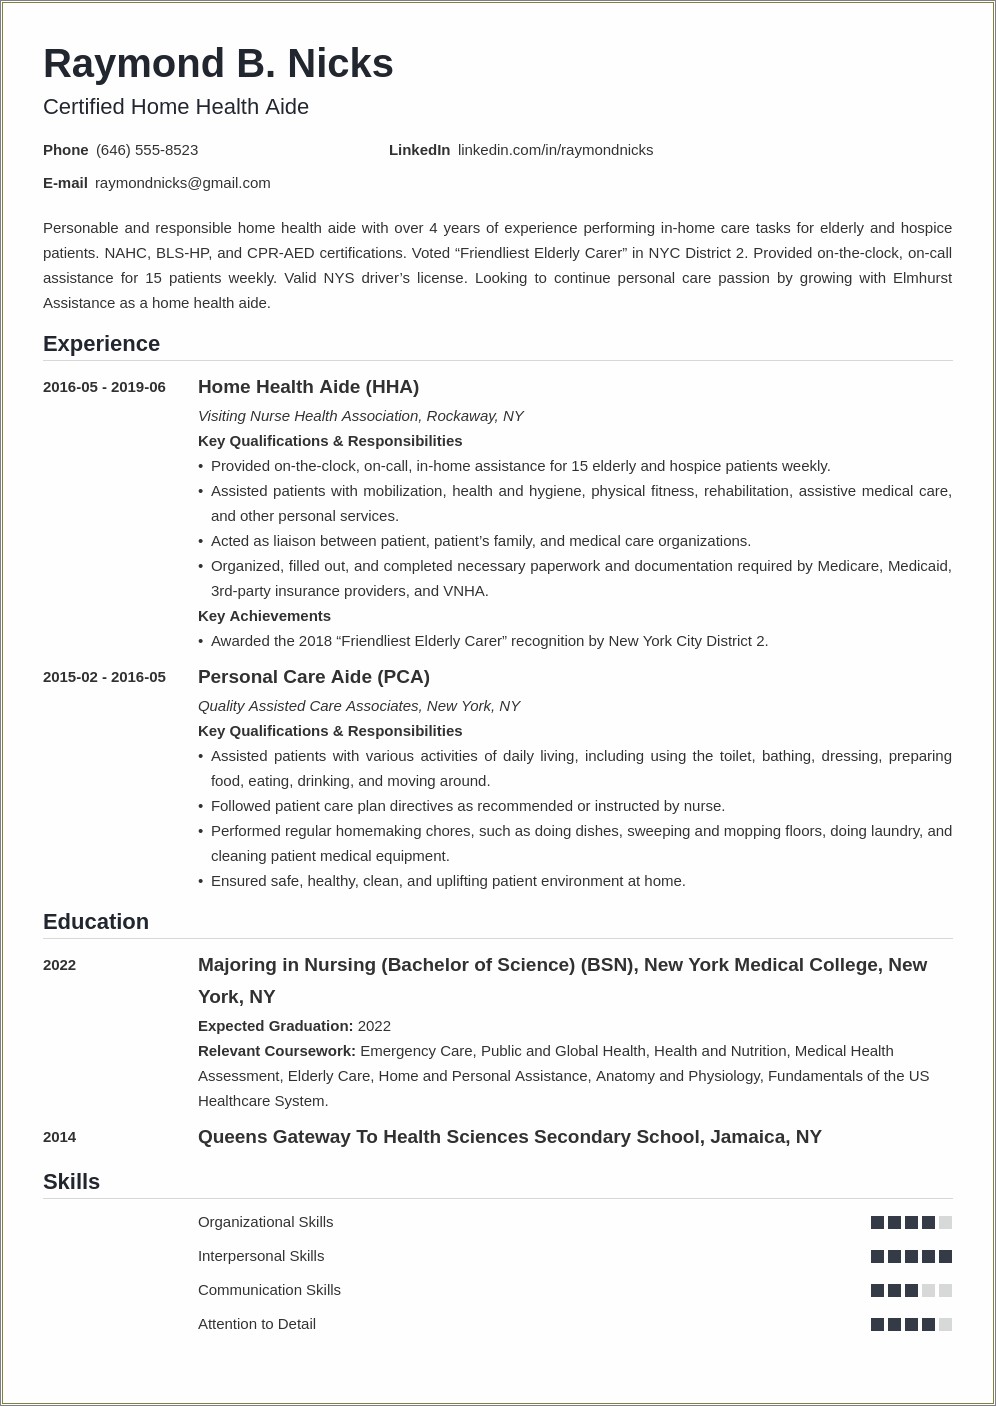 Personal Care Aide Skills For Resume